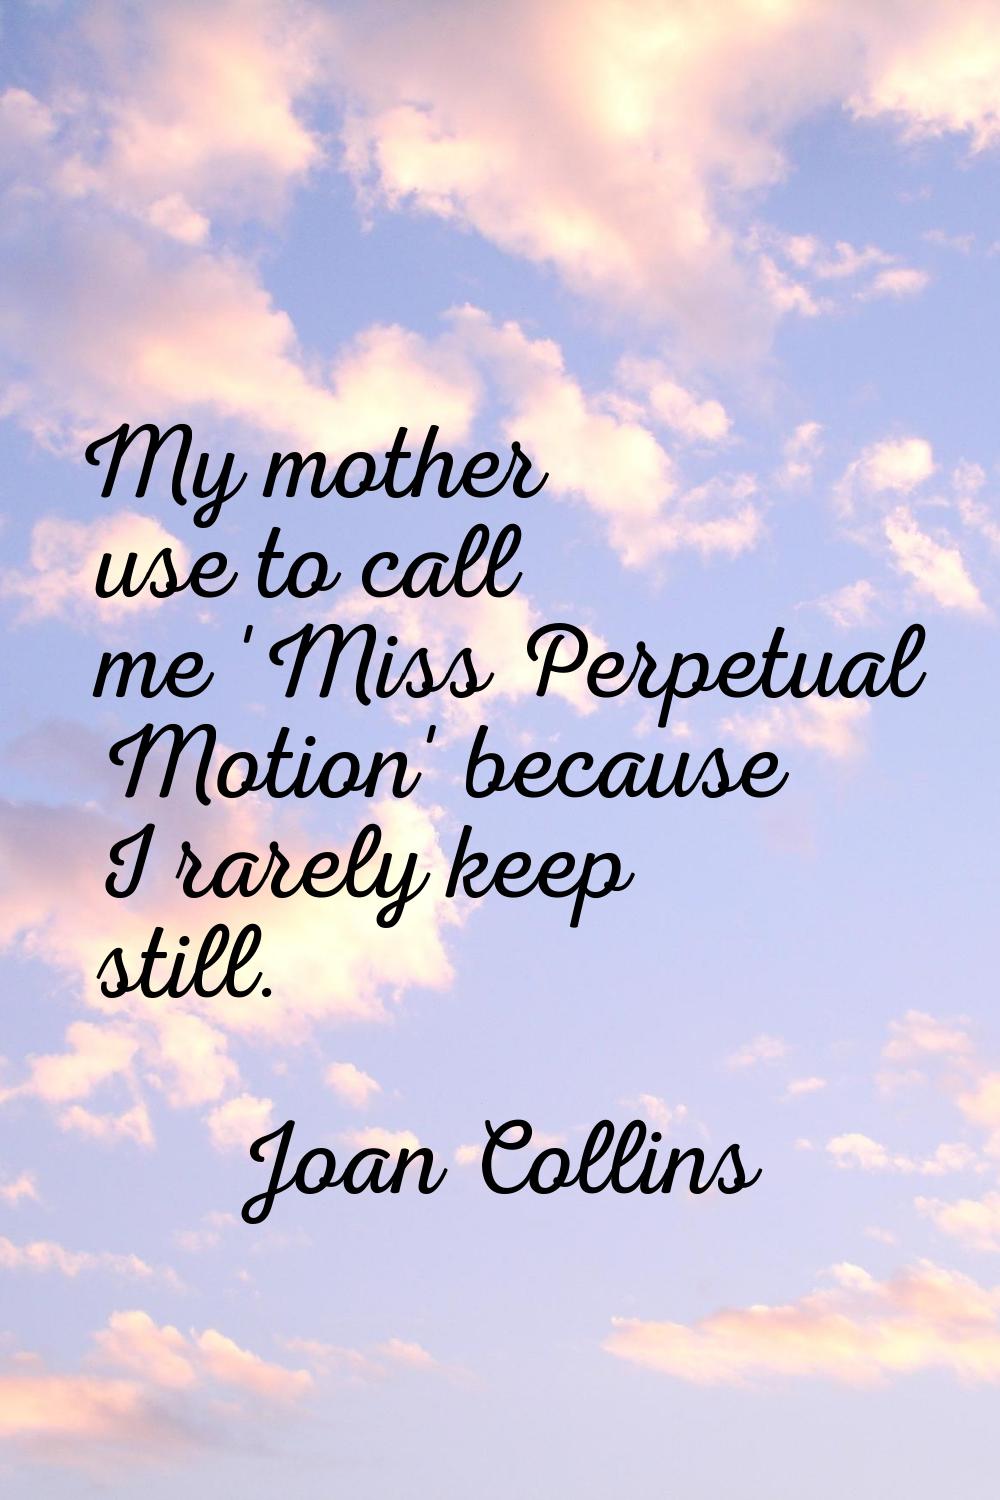 My mother use to call me 'Miss Perpetual Motion' because I rarely keep still.